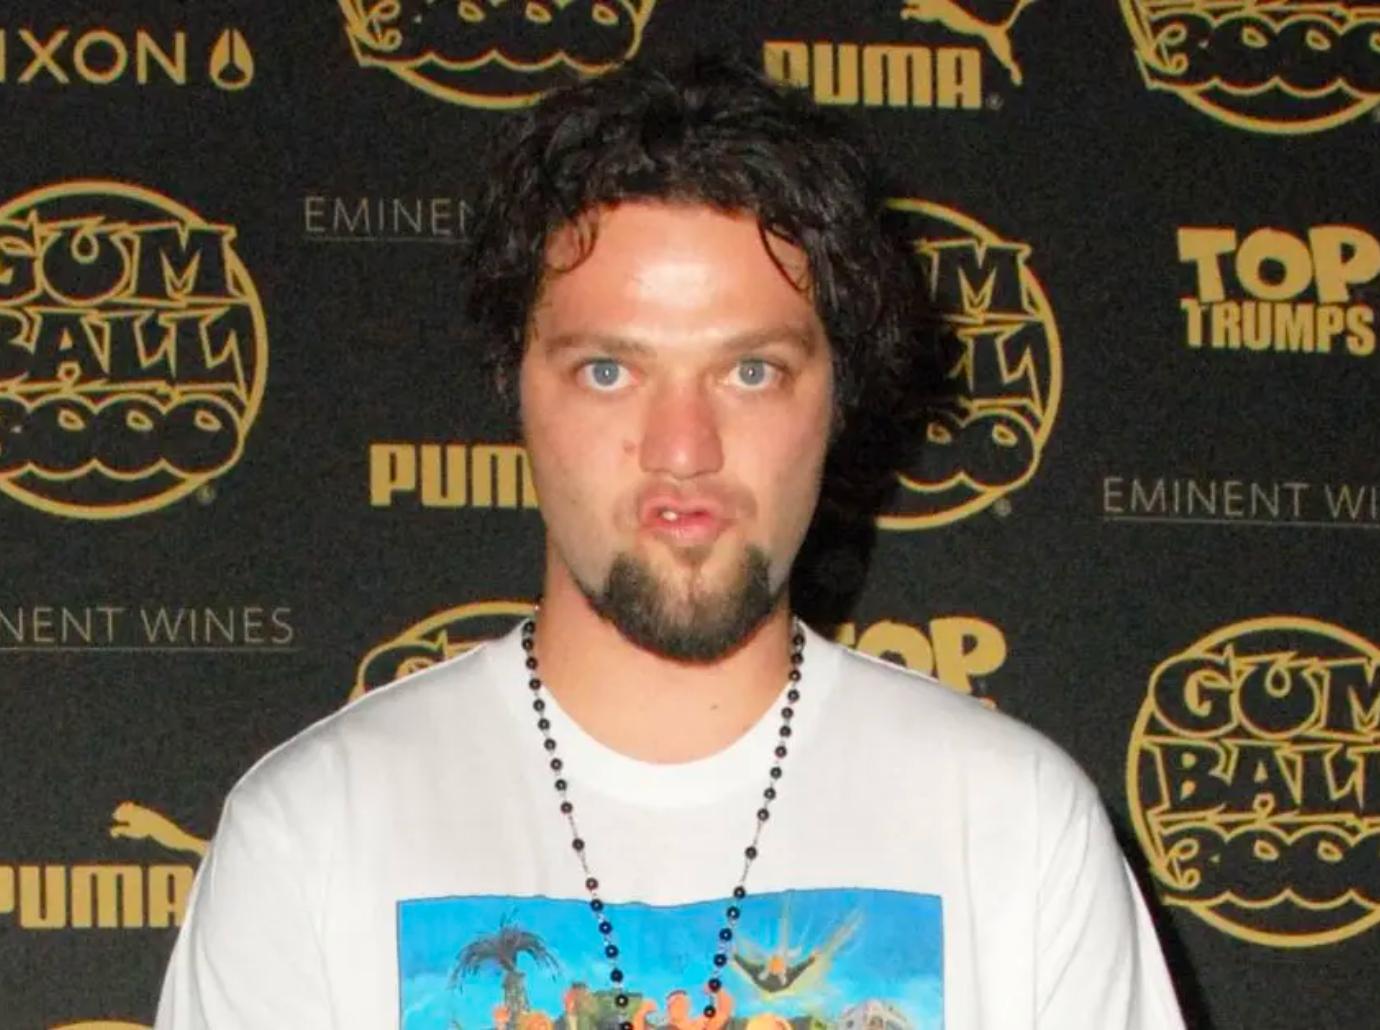 Bam Margera Kicked Out Of Hotel For Domestic Violence Concerns